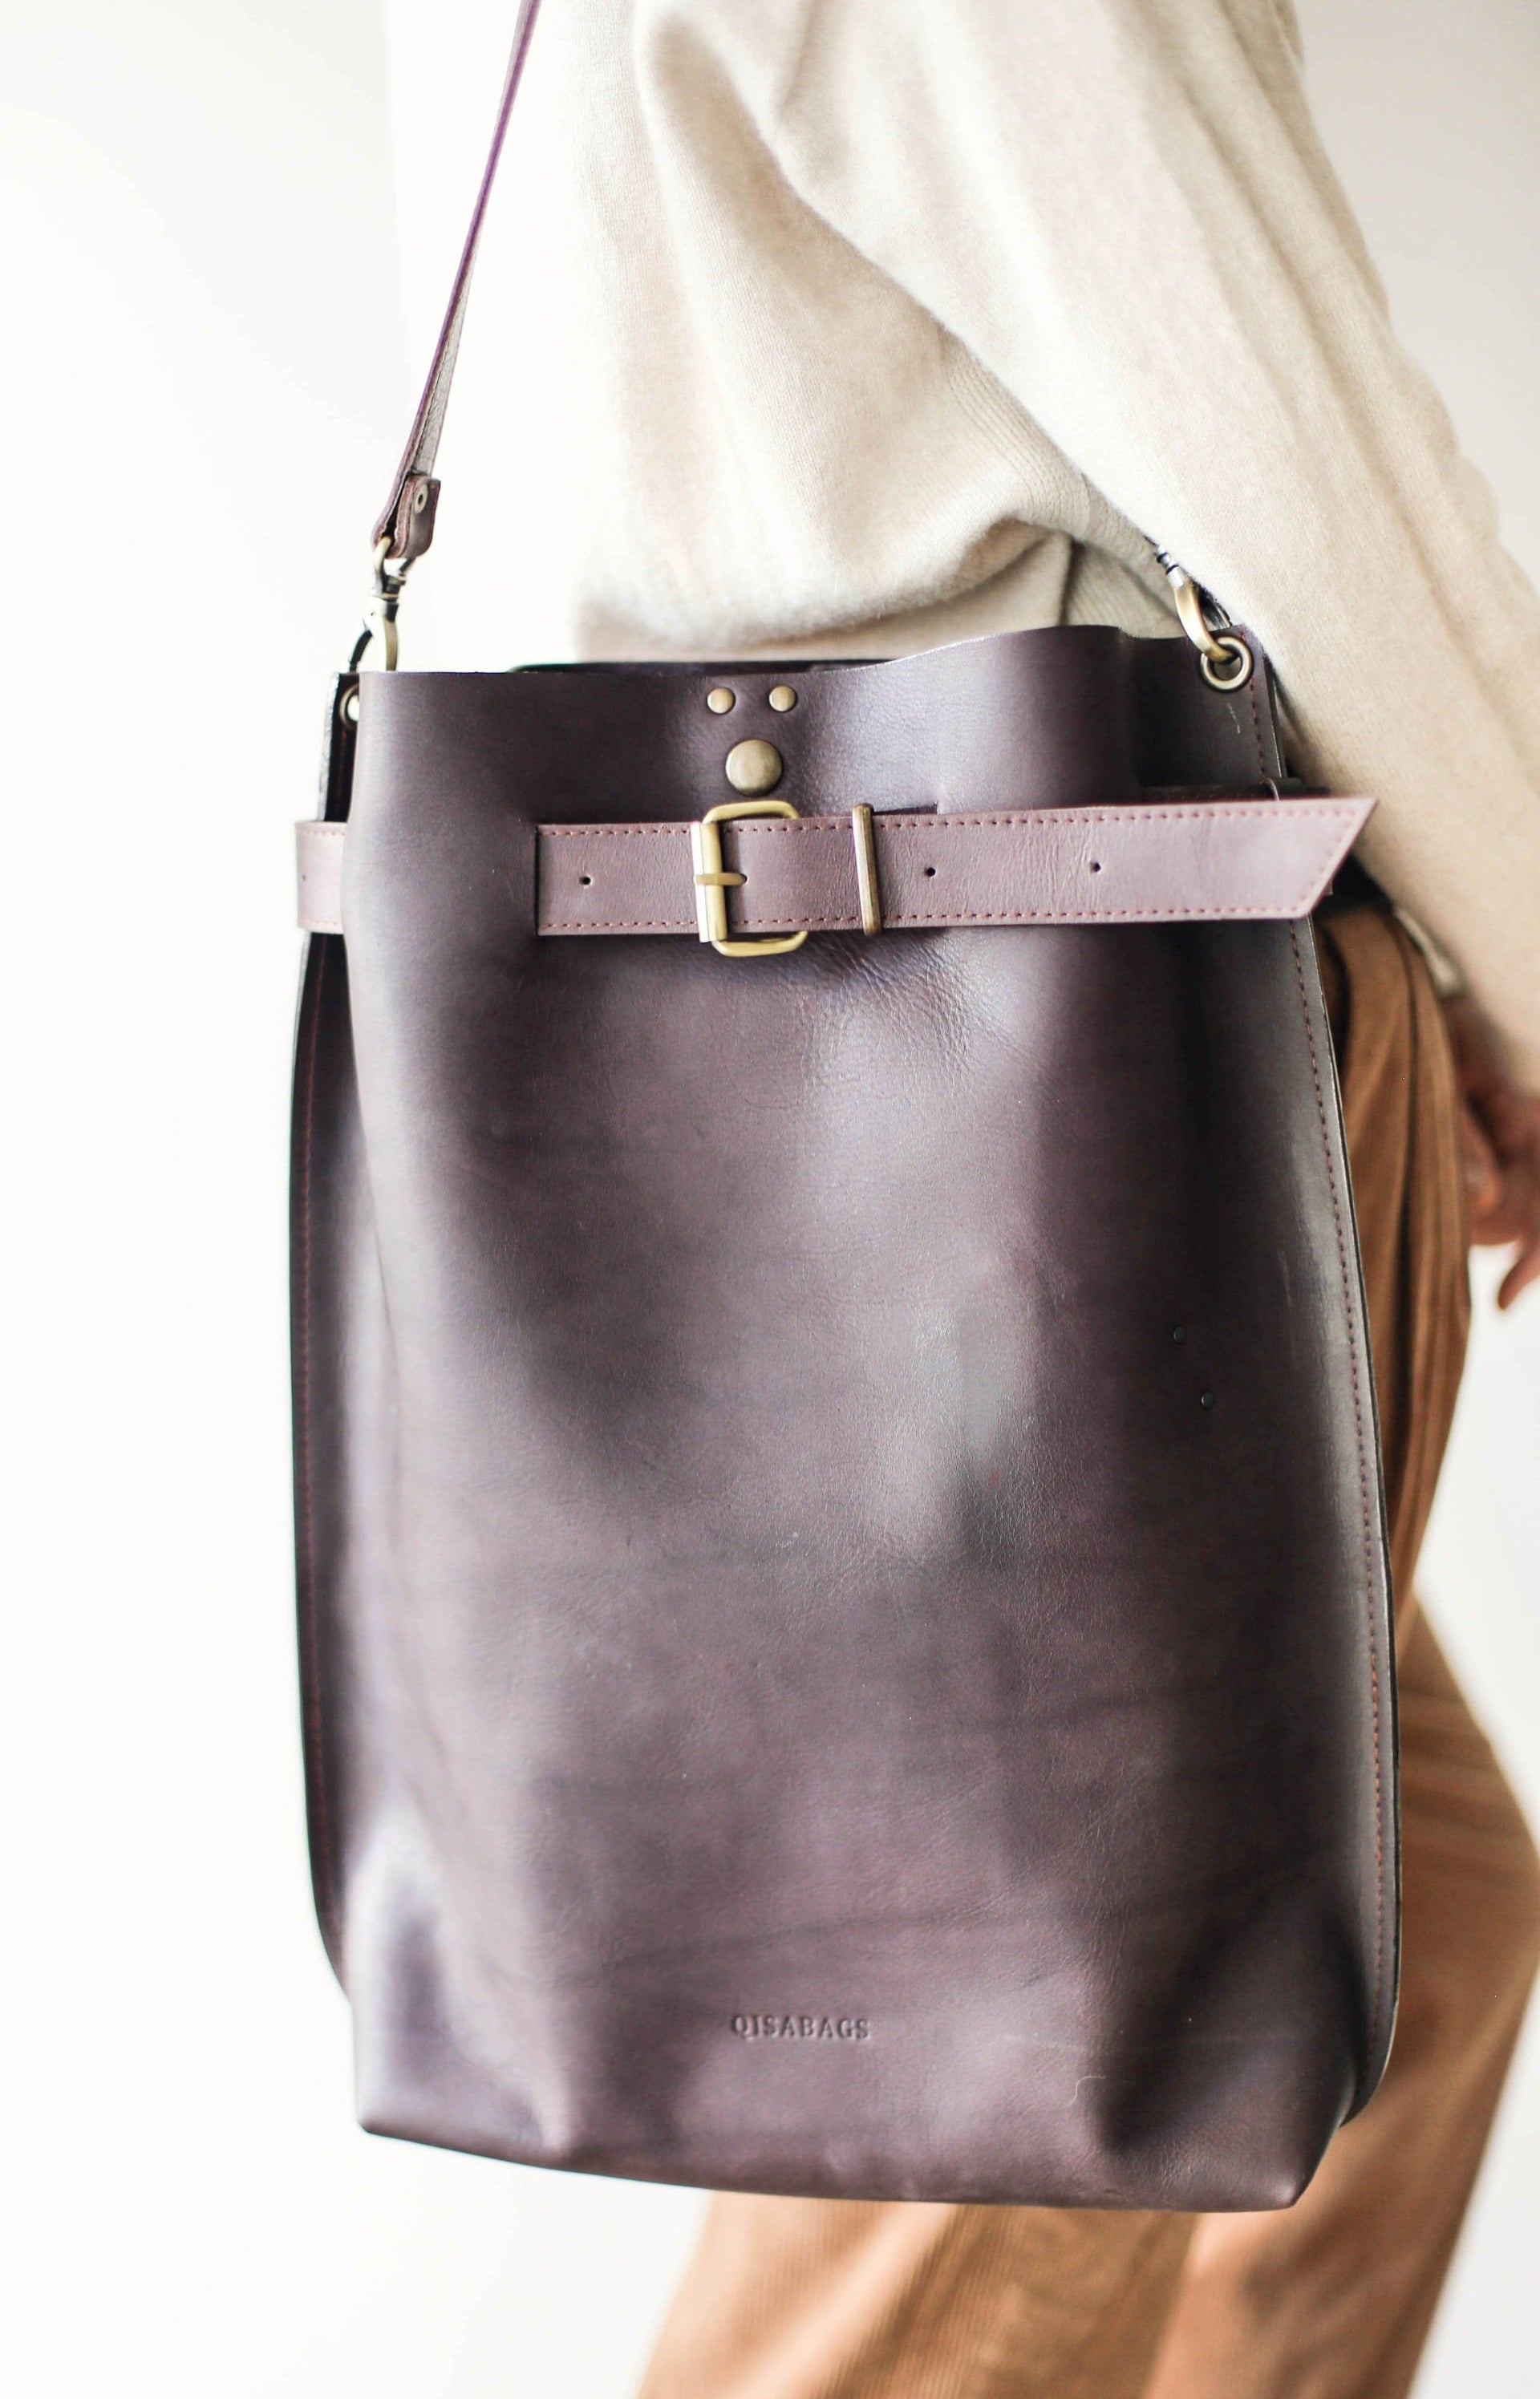 leather convertible backpack purse